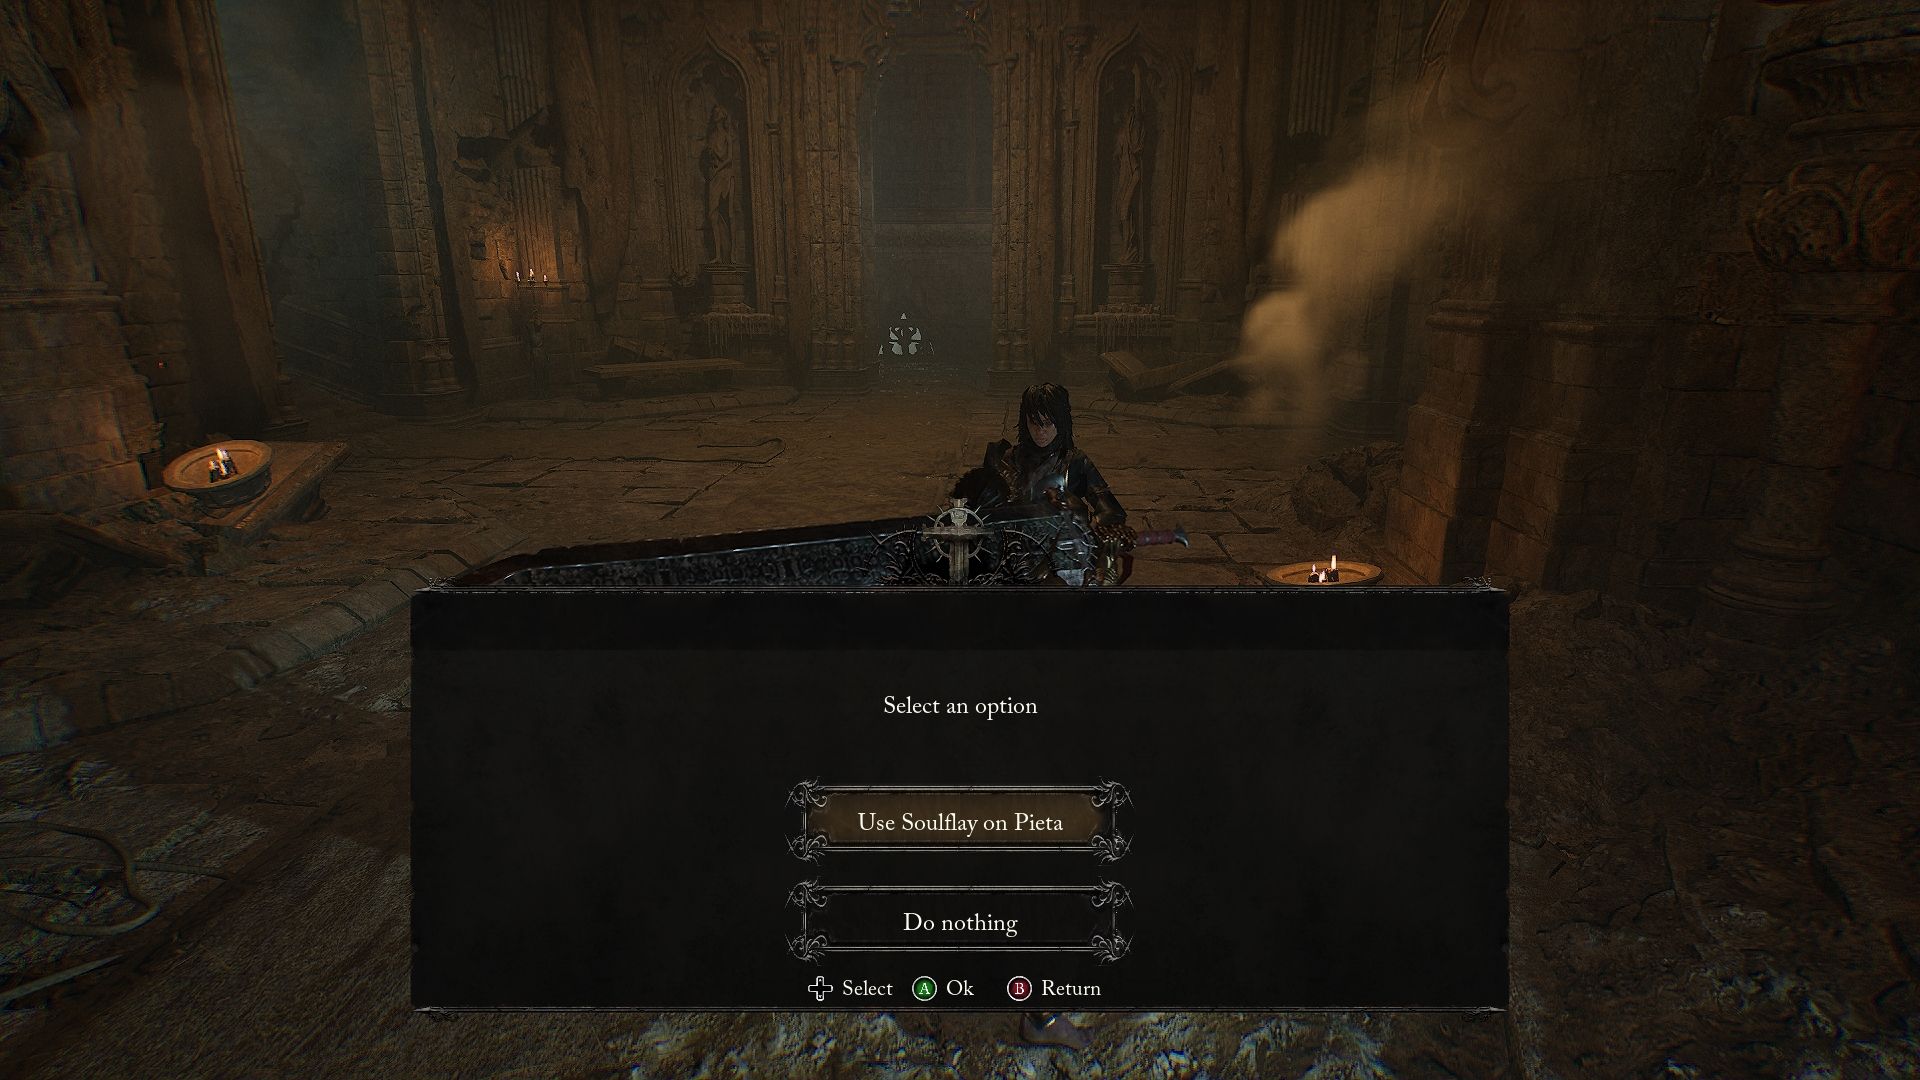 Player with the option to use Soulflay on Pieta Lords of the Fallen